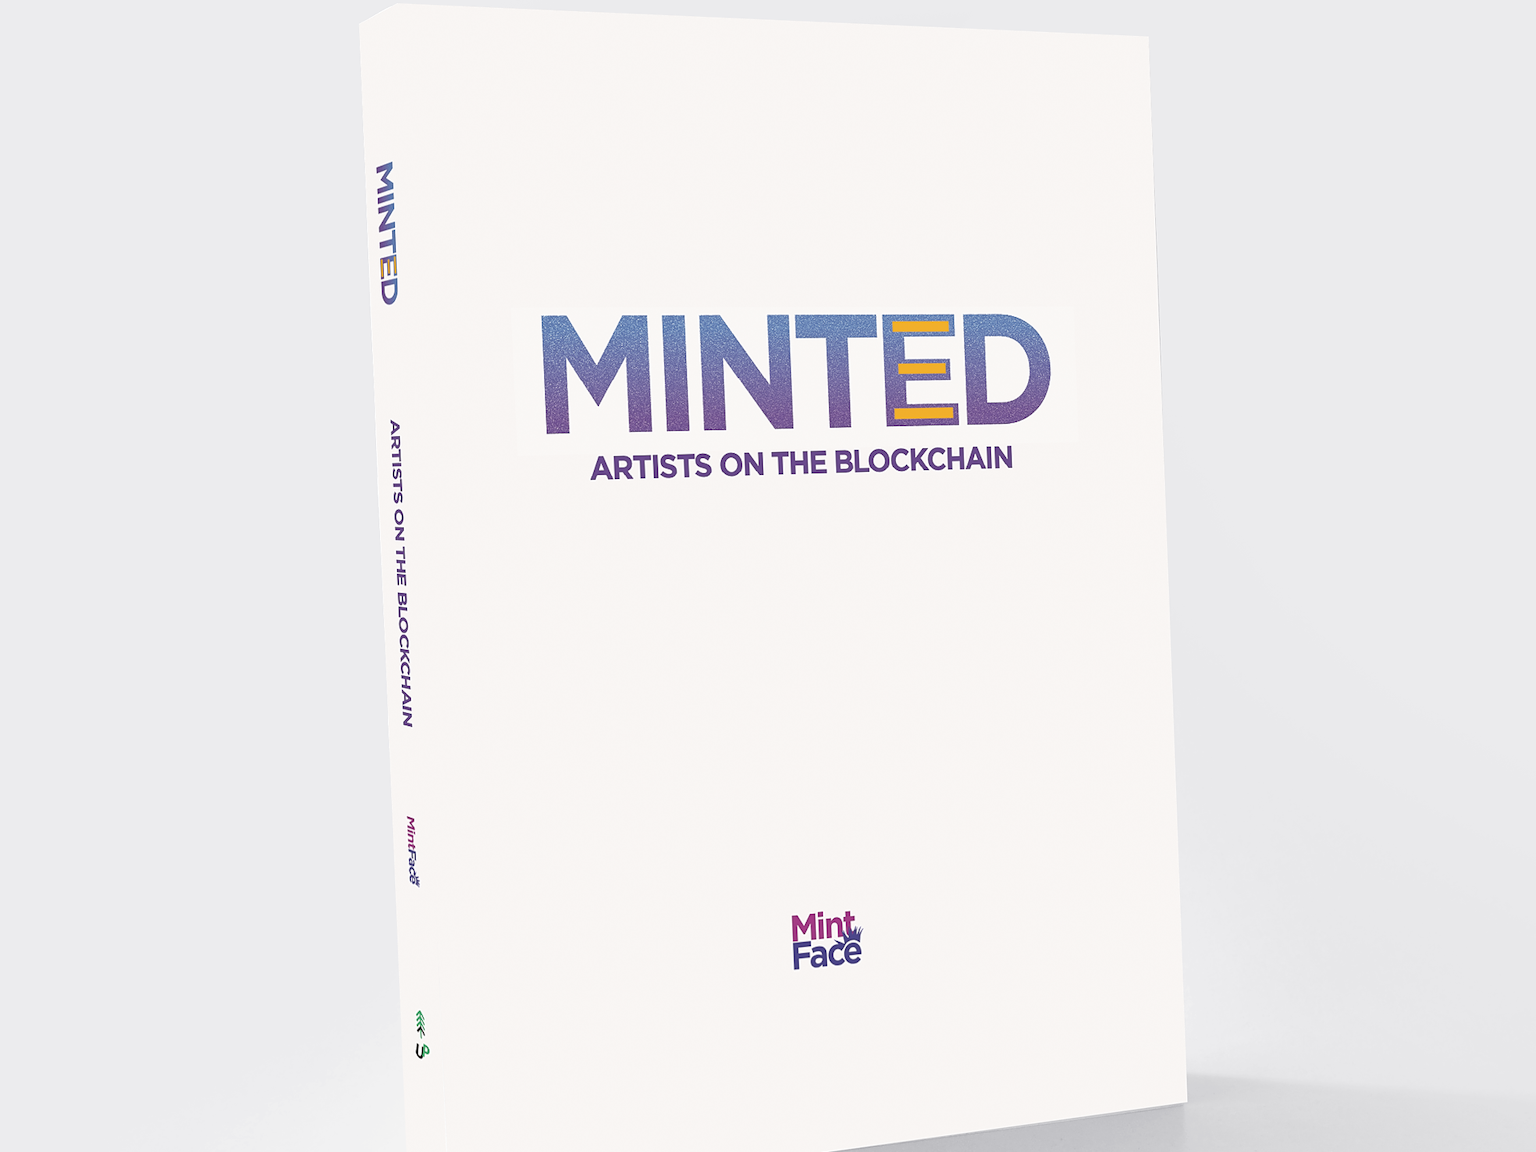 Ryan aka MintFace published Minted featuring almost 100 artists on the blockchain in 2021.